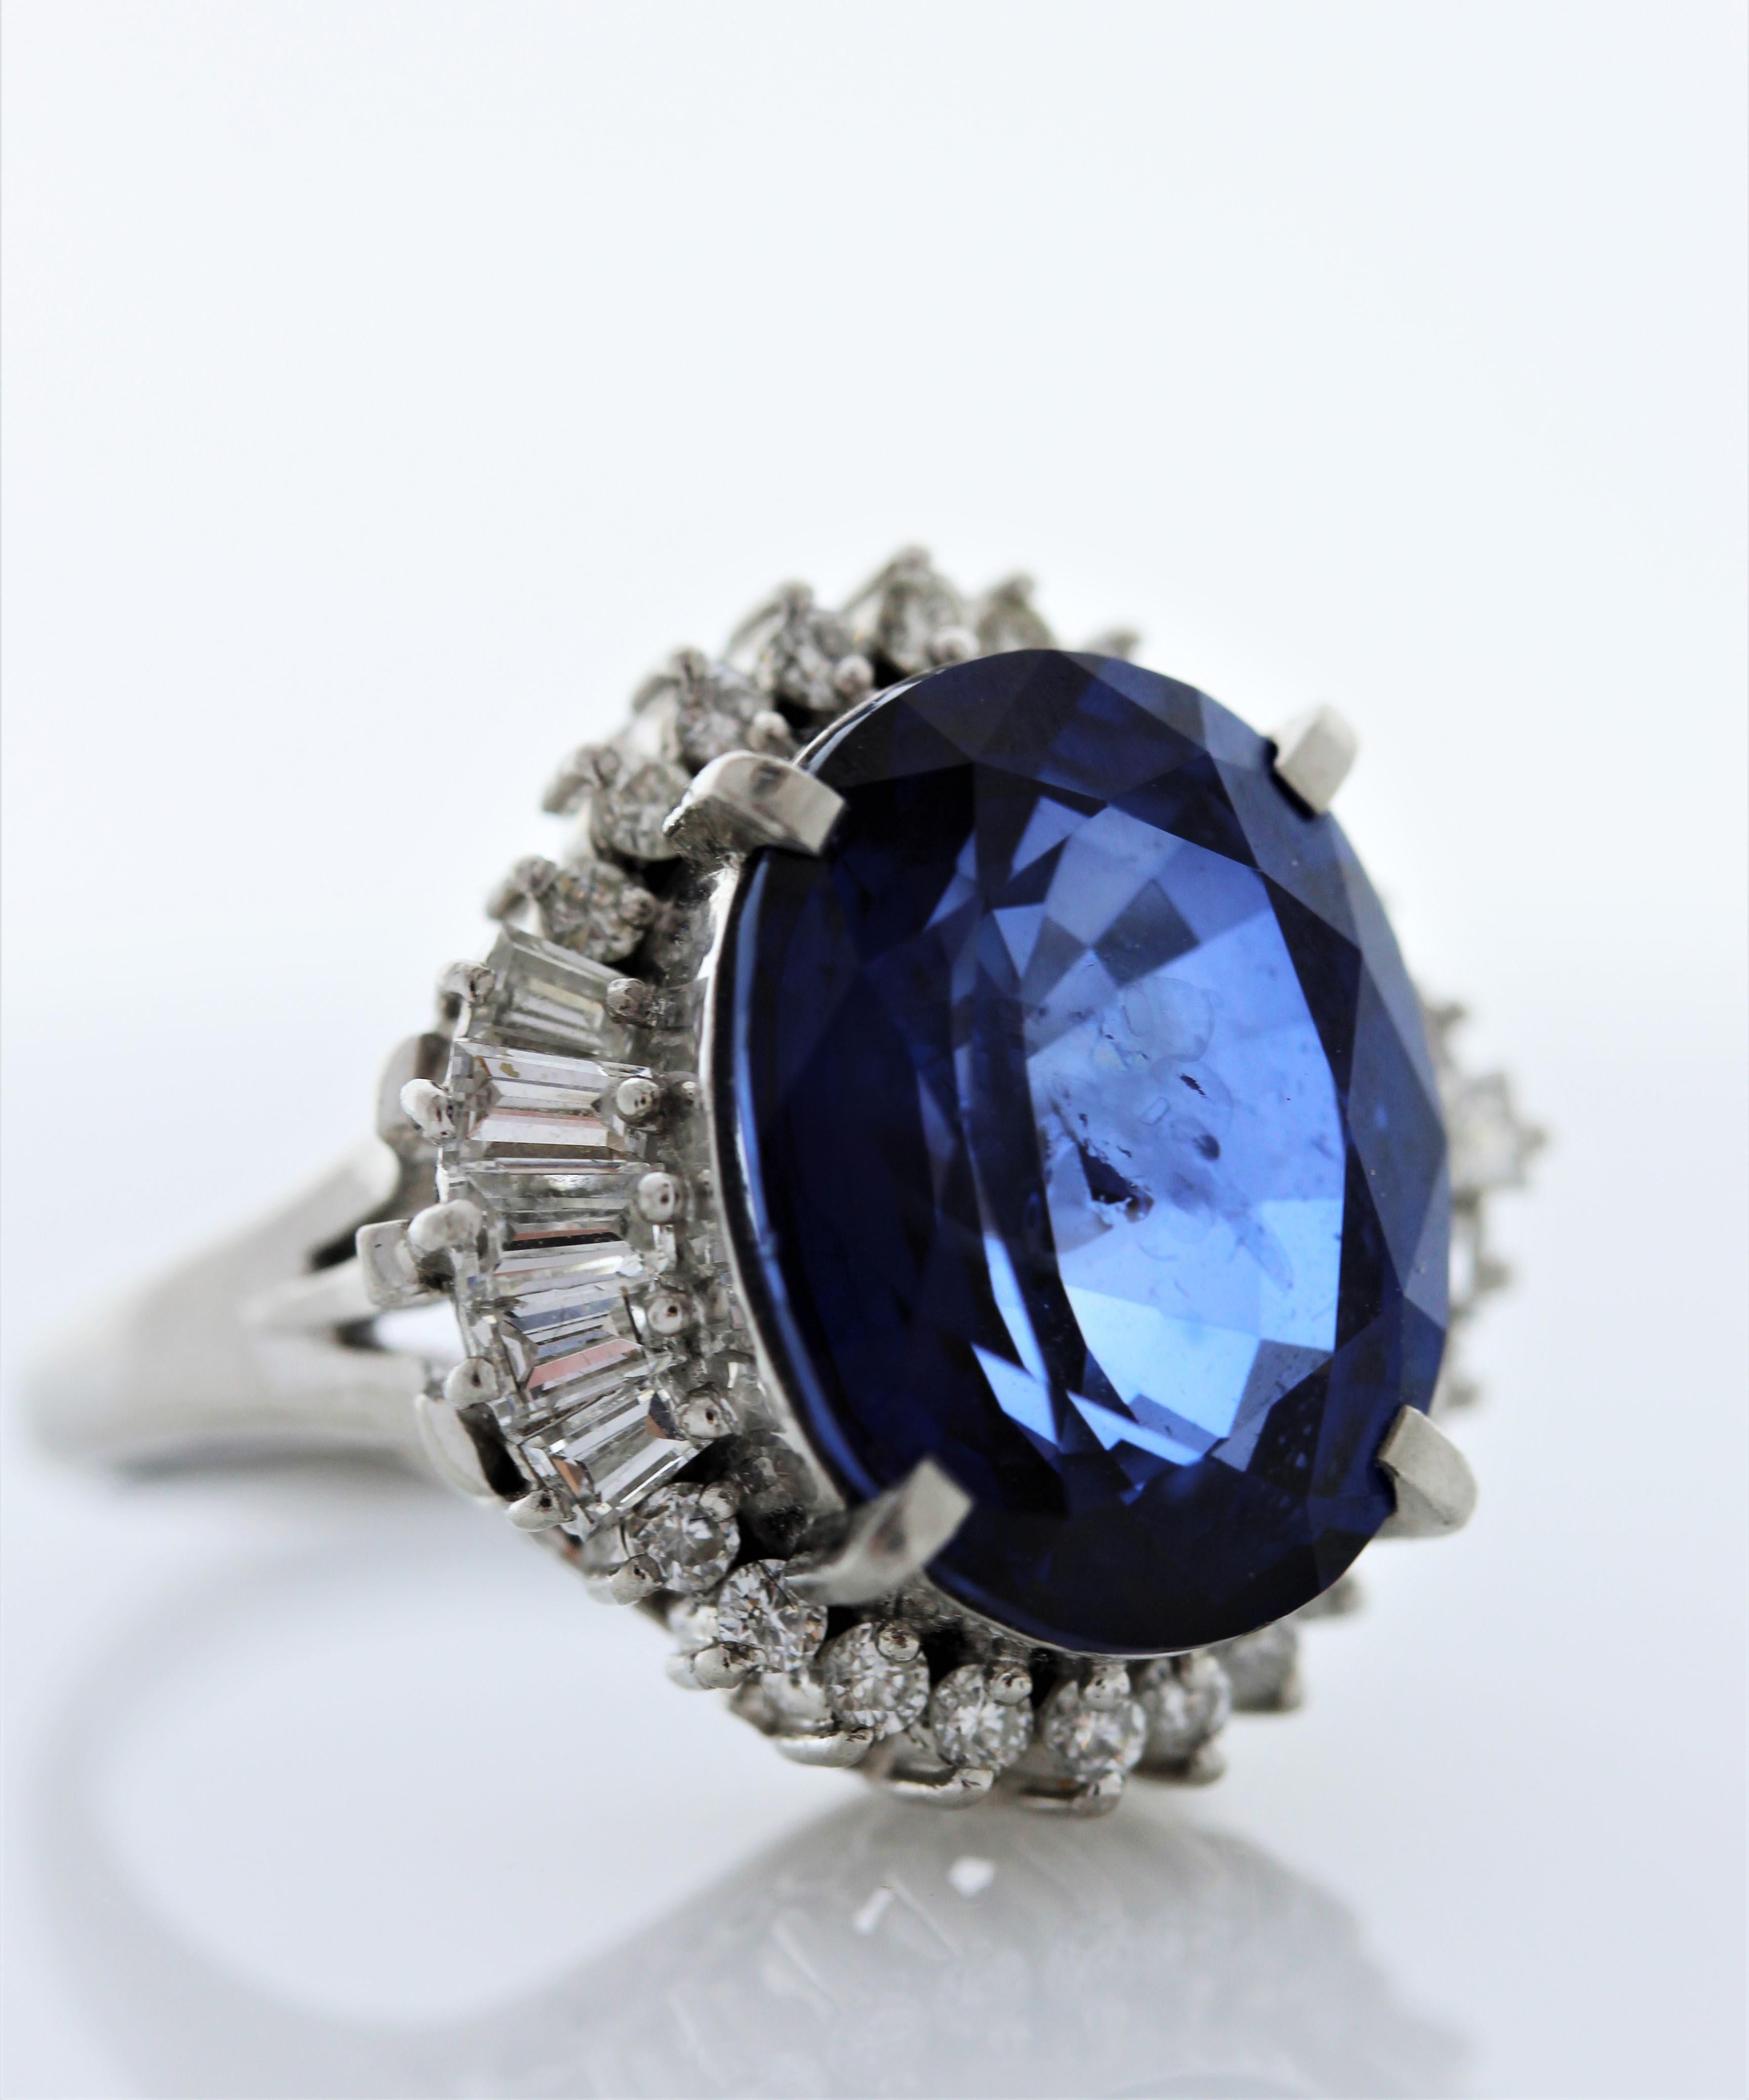 Introducing a truly magnificent creation that epitomizes luxury and sophistication: our exceptional 11.24 carat certified Oval Blue Sapphire Ring adorned with 28 Diamonds totaling 1.04 carats, meticulously set in exquisite Platinum. At the heart of